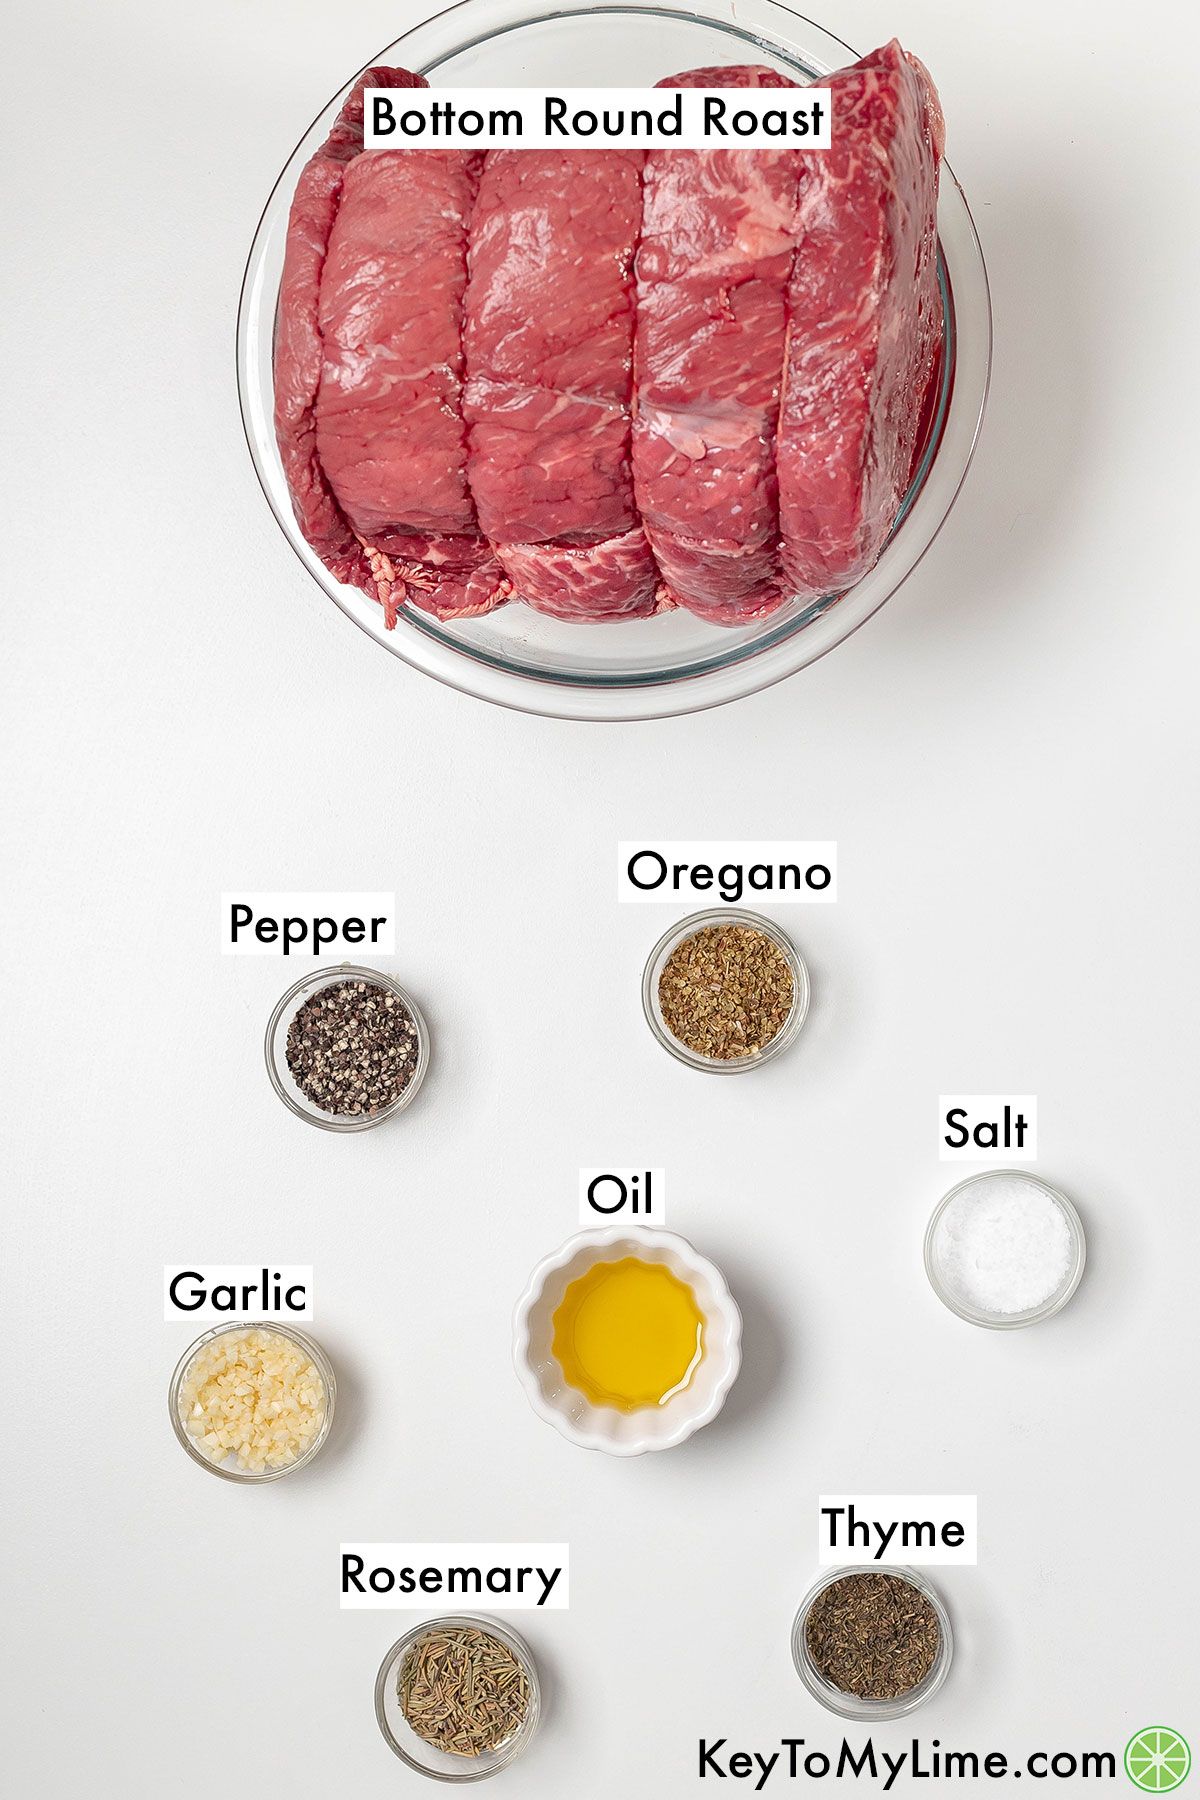 The labeled ingredients for bottom round roast.